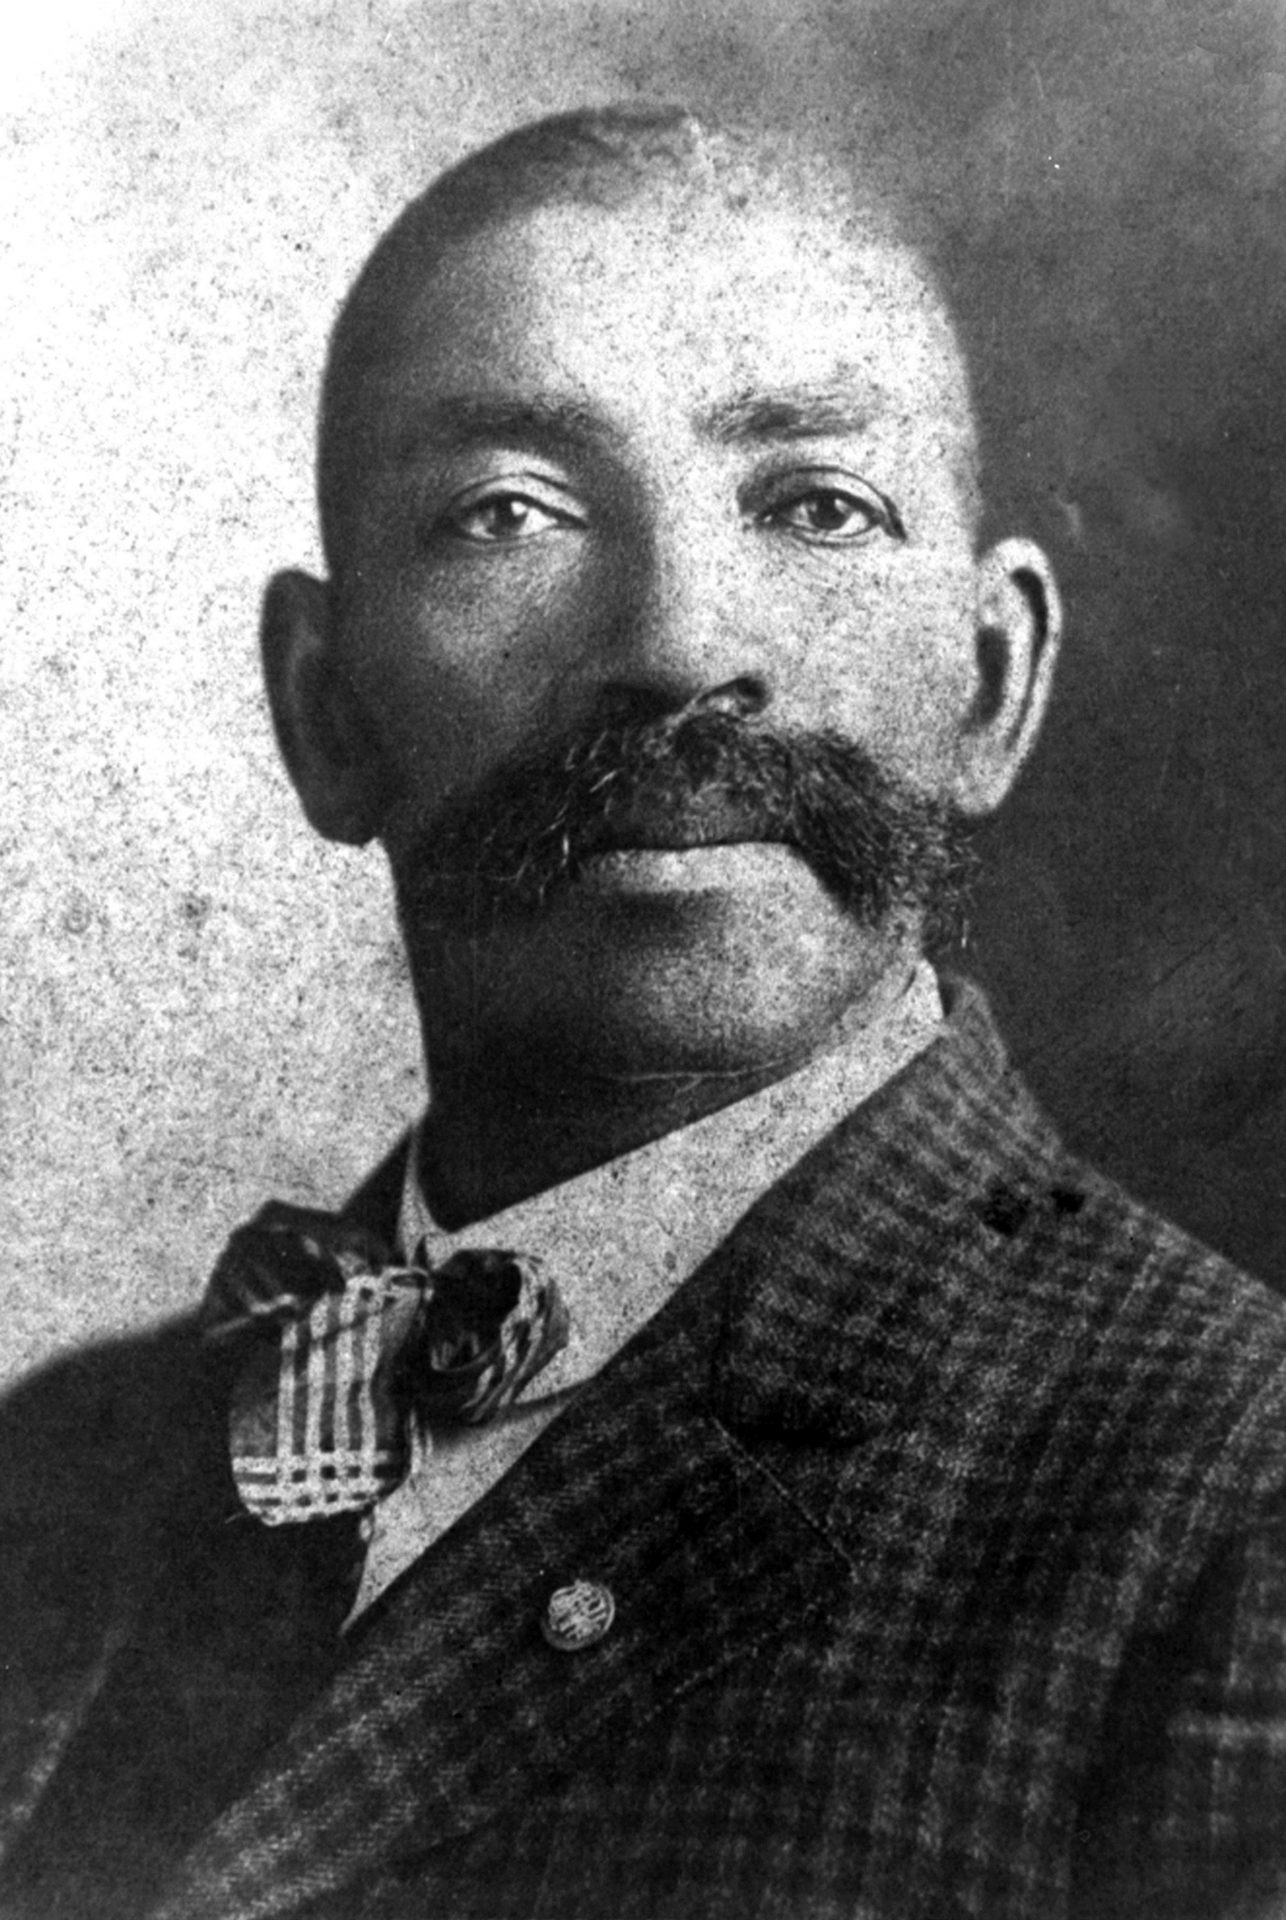 Bass Reeves, lawman extraordinaire of the American West.